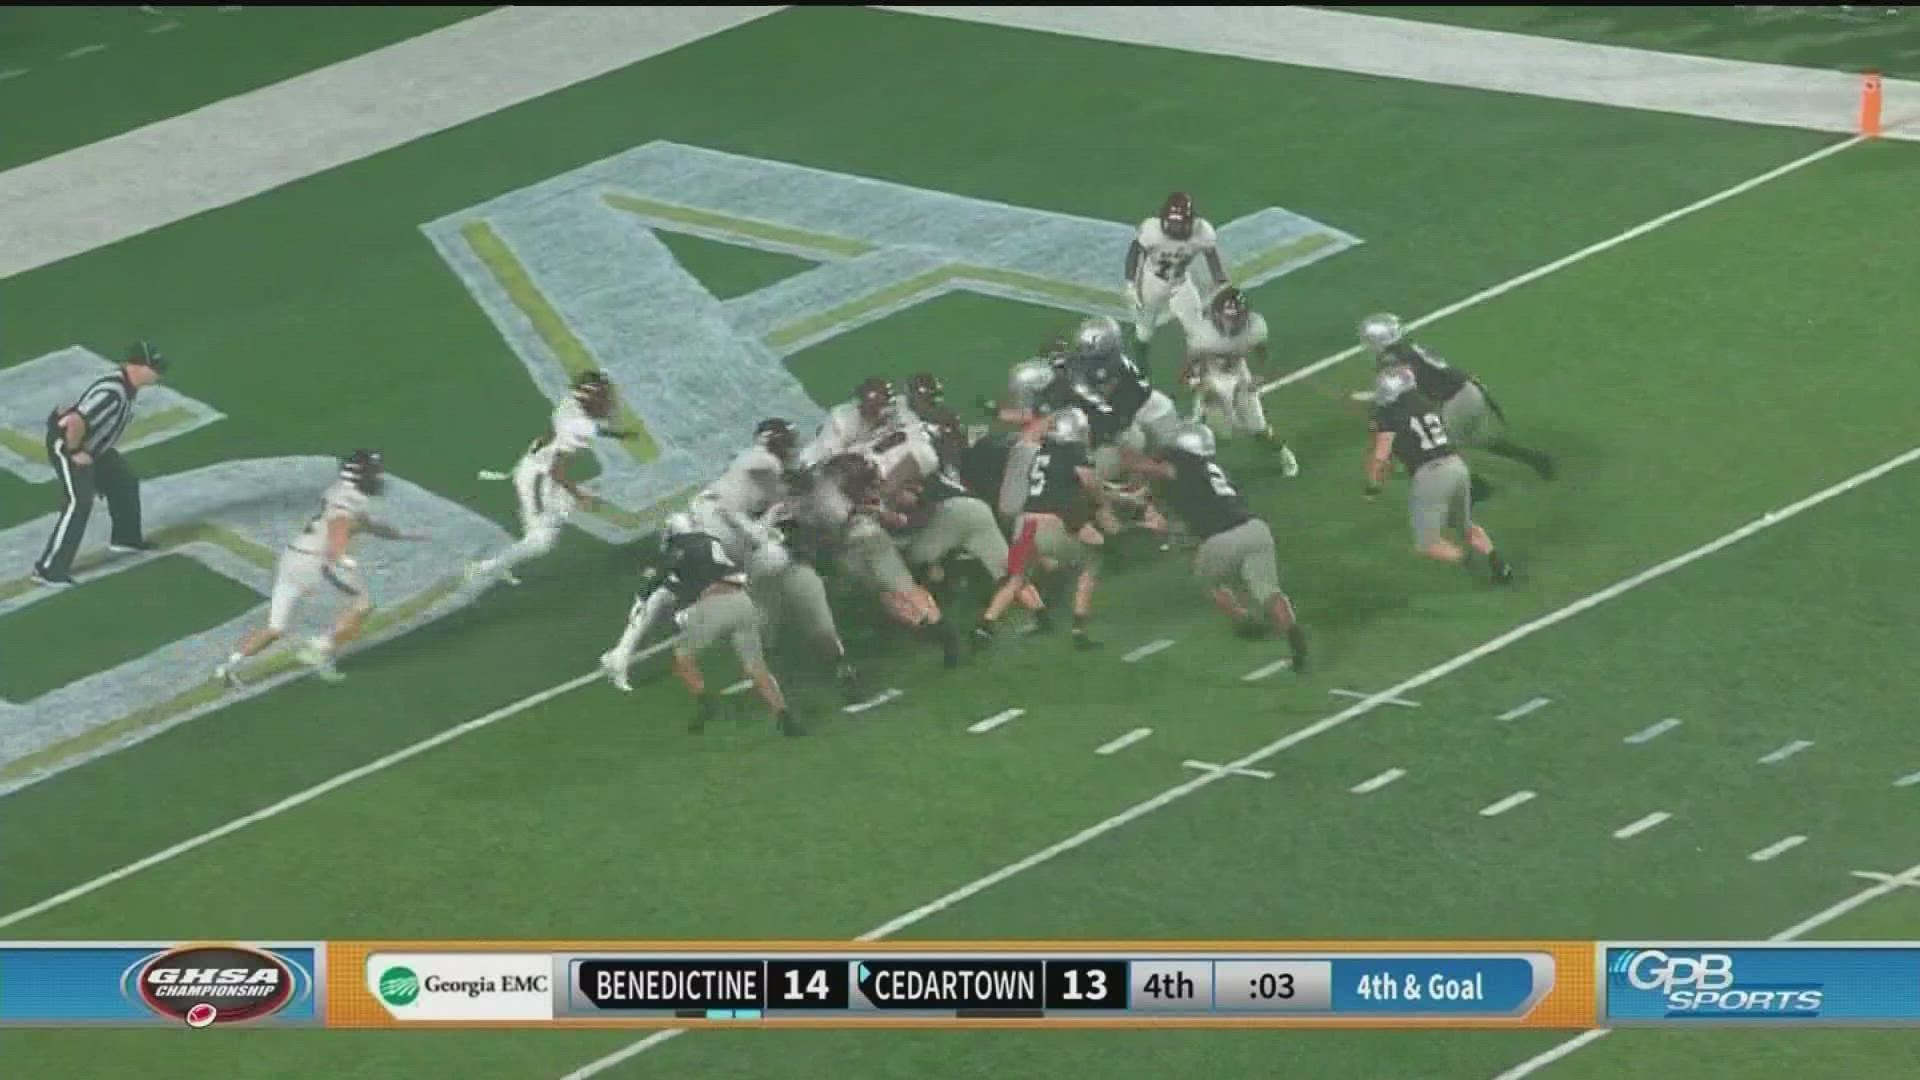 A wild finish resulted in a Benedictine last second defensive stand as they won 14-13 to repeat as state champions.